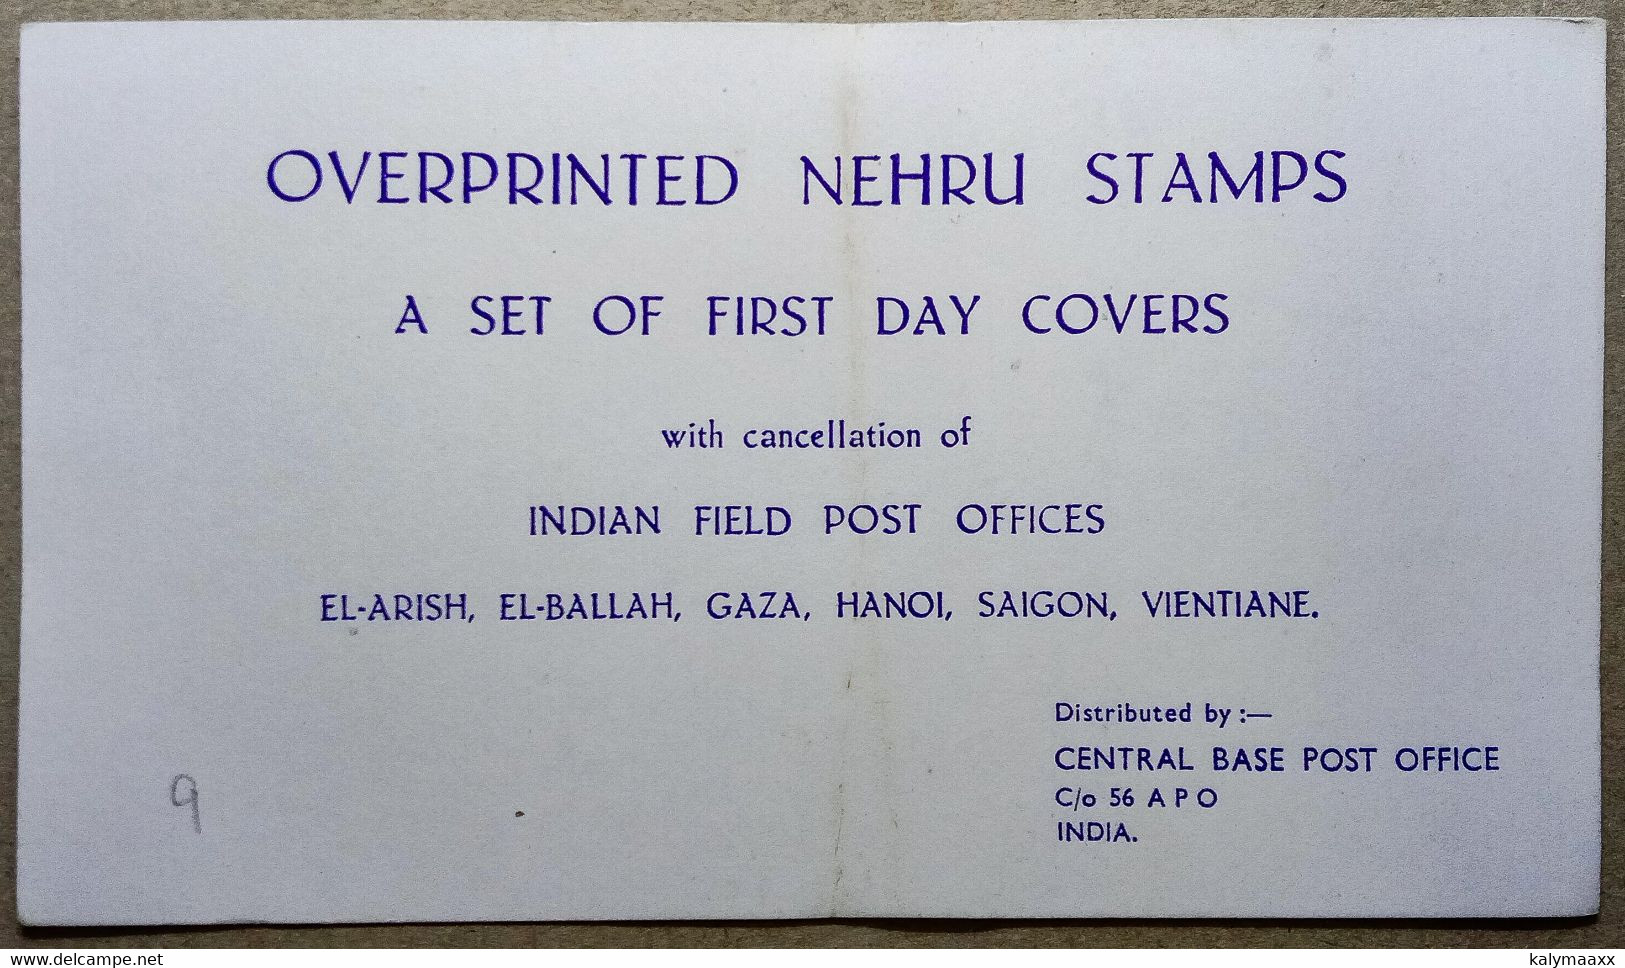 INDIA 1965 ICC & UNEF COMPLETE SET OF 6 F.P.O CANCELLED COVER & INFORMATION BROCHURE, VIETNAM, LAOS, GAZA...RARE - Franchise Militaire